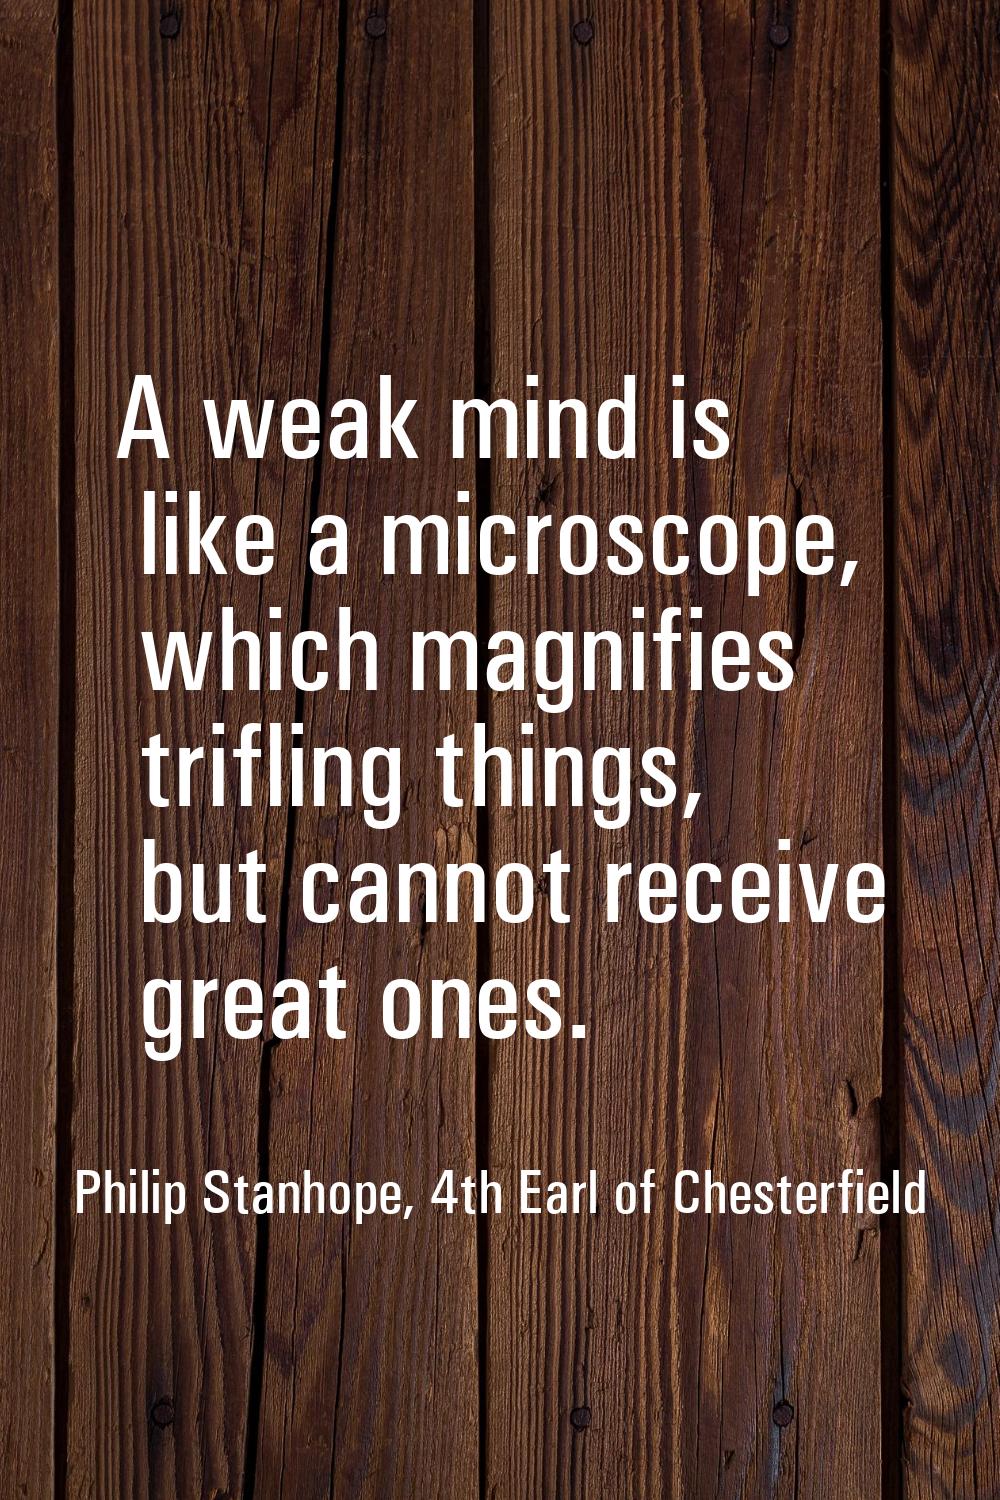 A weak mind is like a microscope, which magnifies trifling things, but cannot receive great ones.